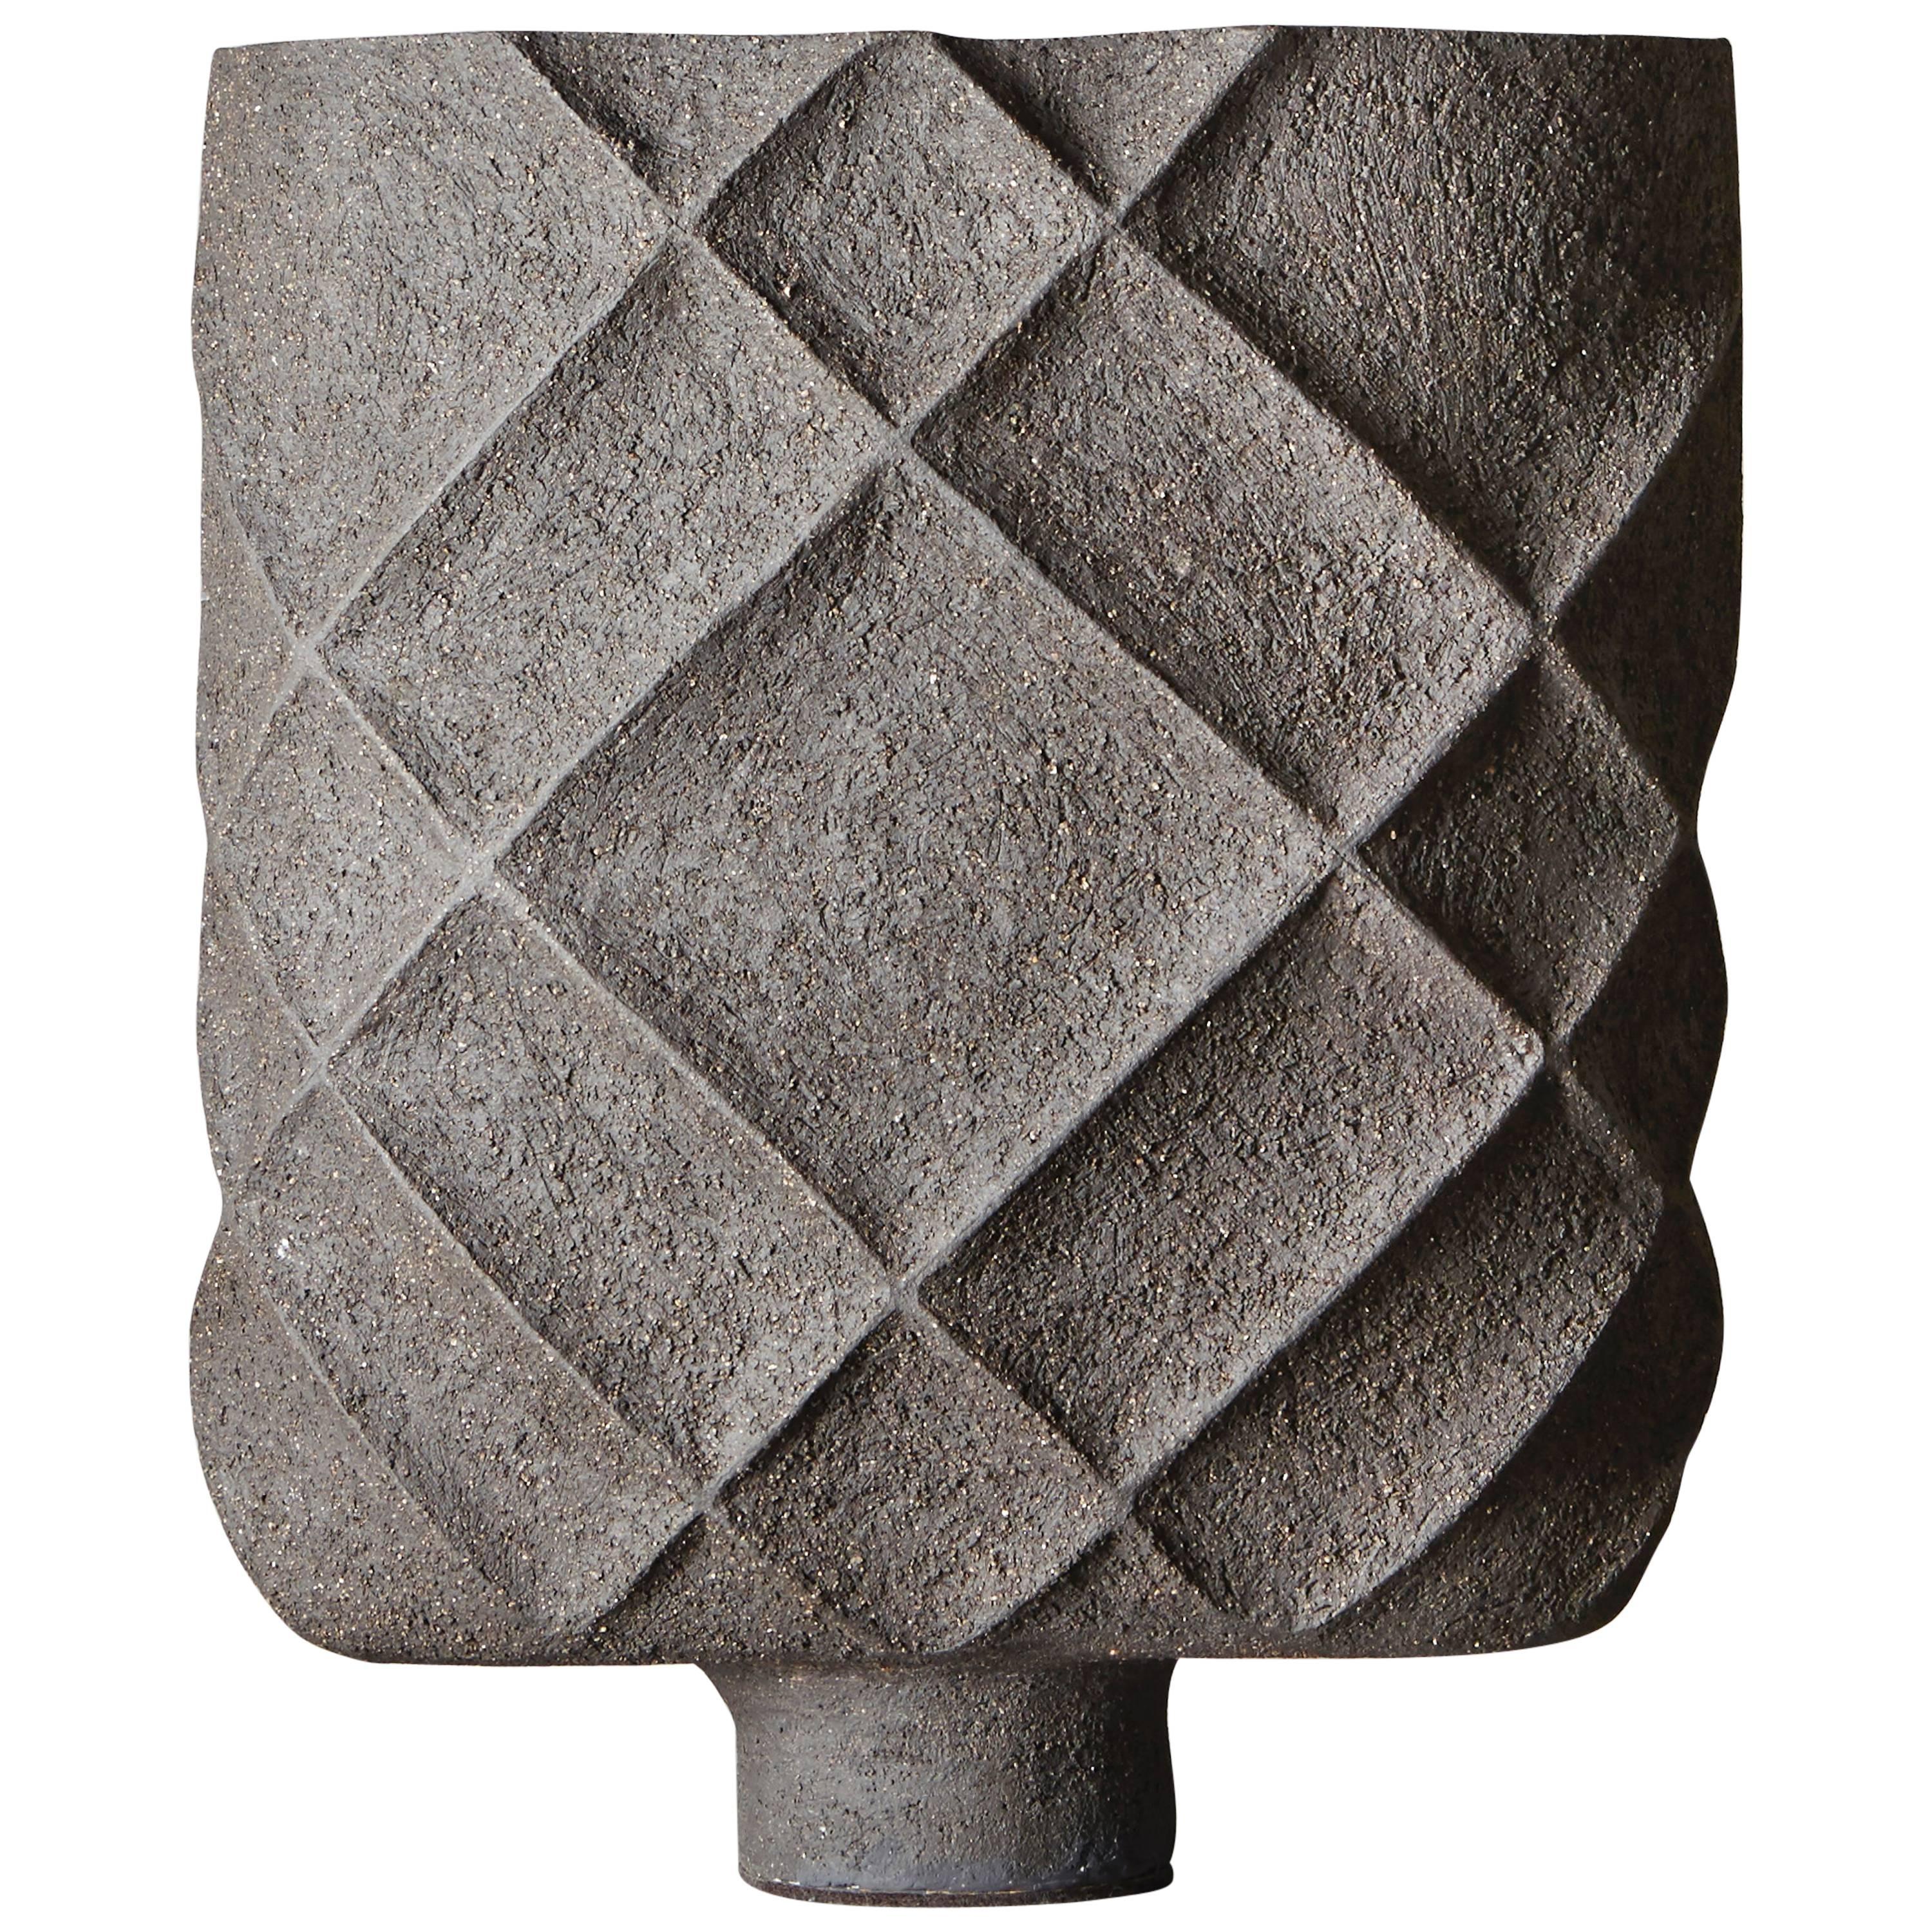 Sculpted Sandstone Table Lamp by Isabelle Sicart, 2015 For Sale